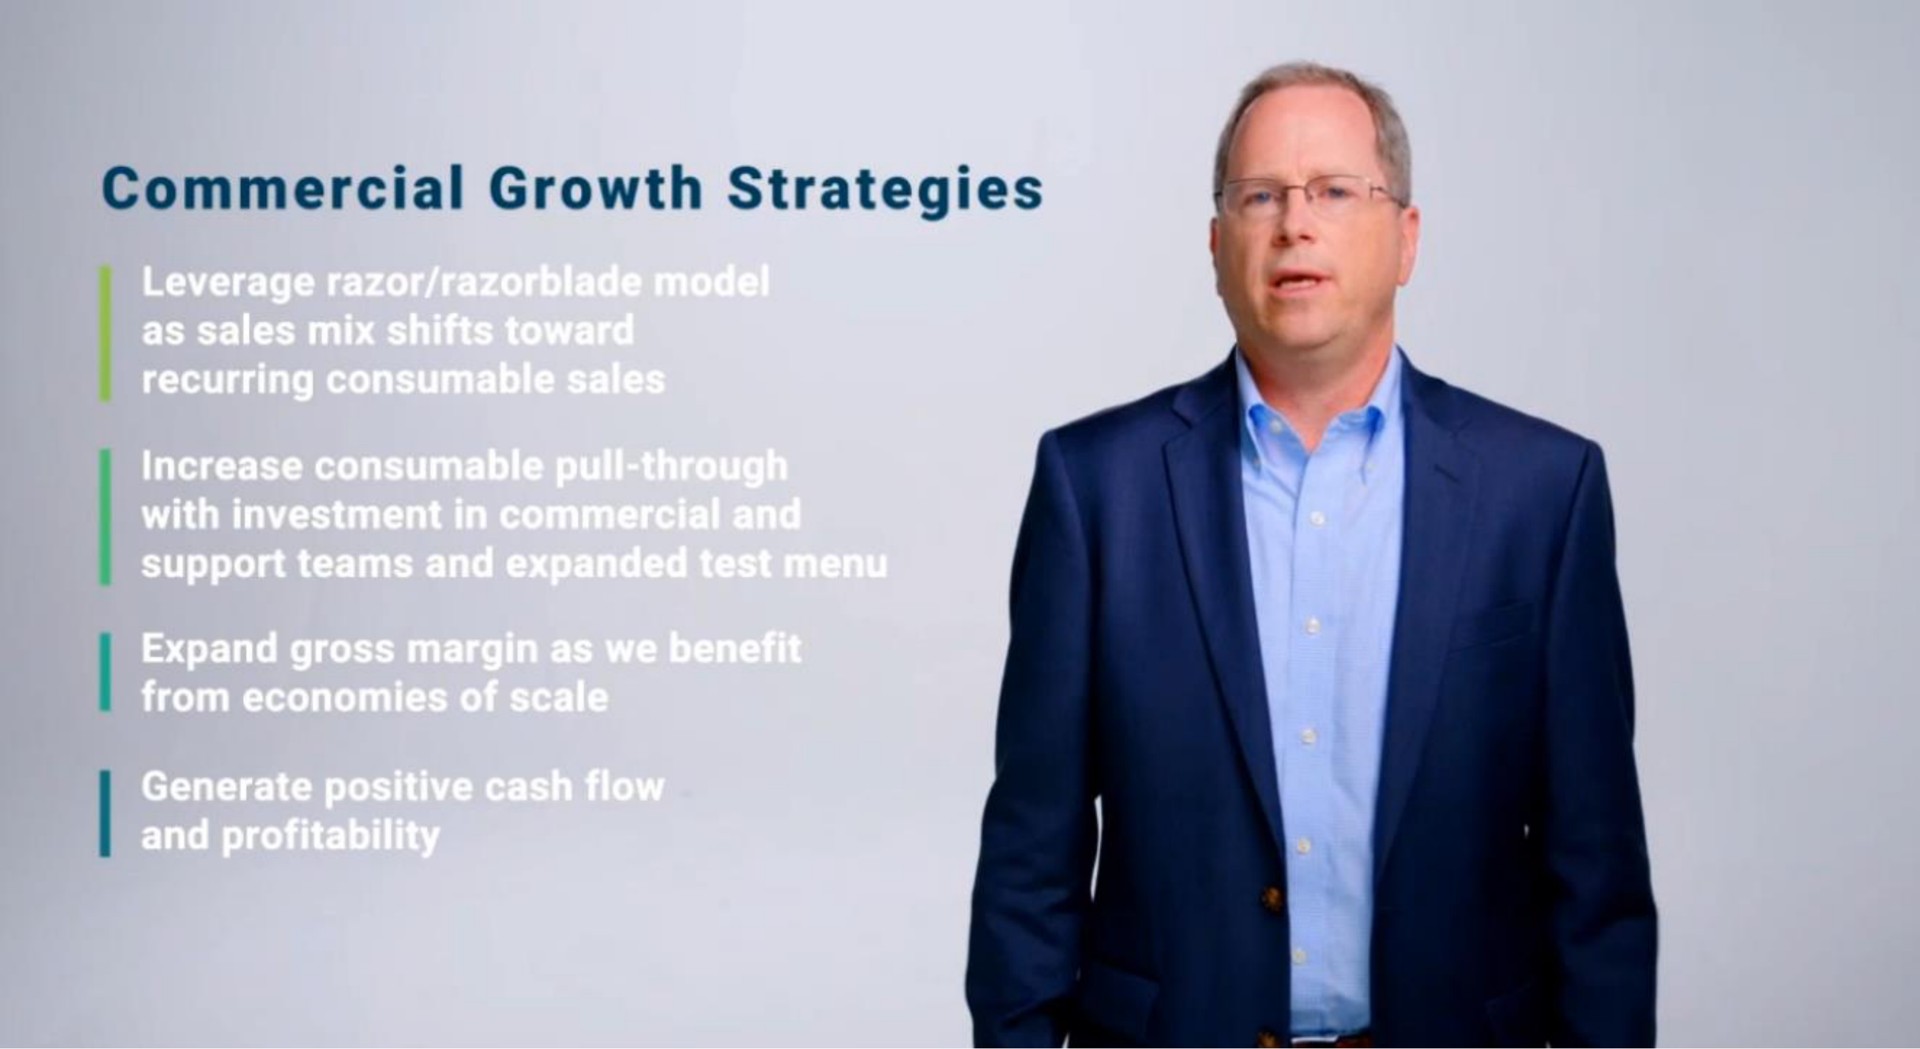 commercial growth strategies | Isoplexis